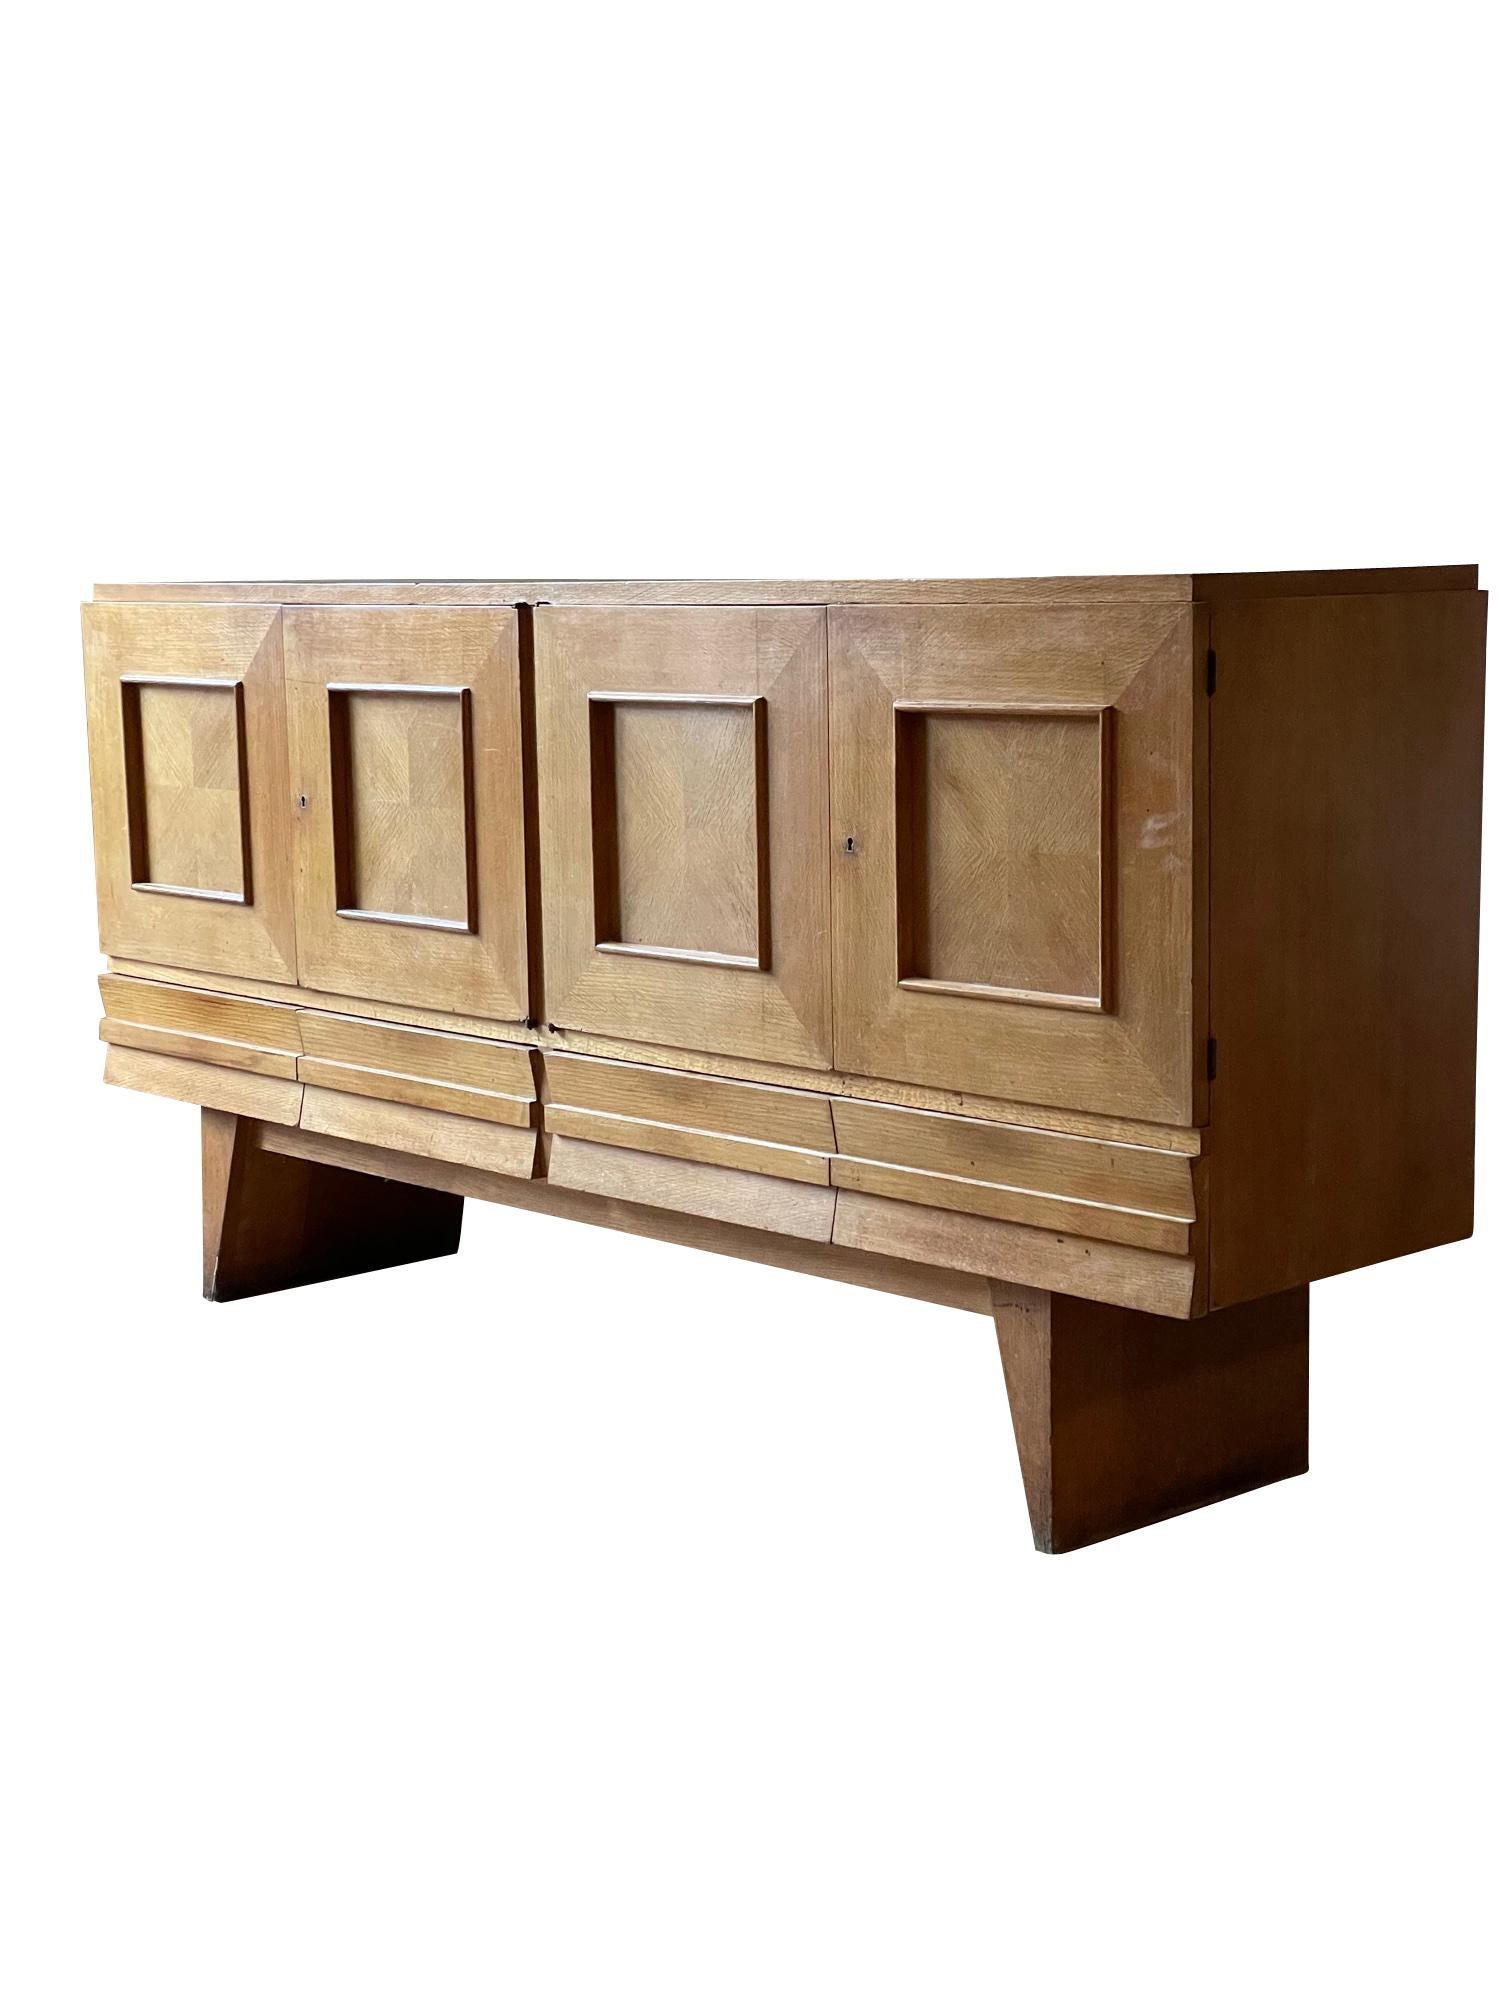 1950's French oak credenza
Four doors as well as four hidden drawers
Seven interior shelves
Decorative mitered panels on door fronts
Arriving tbd.